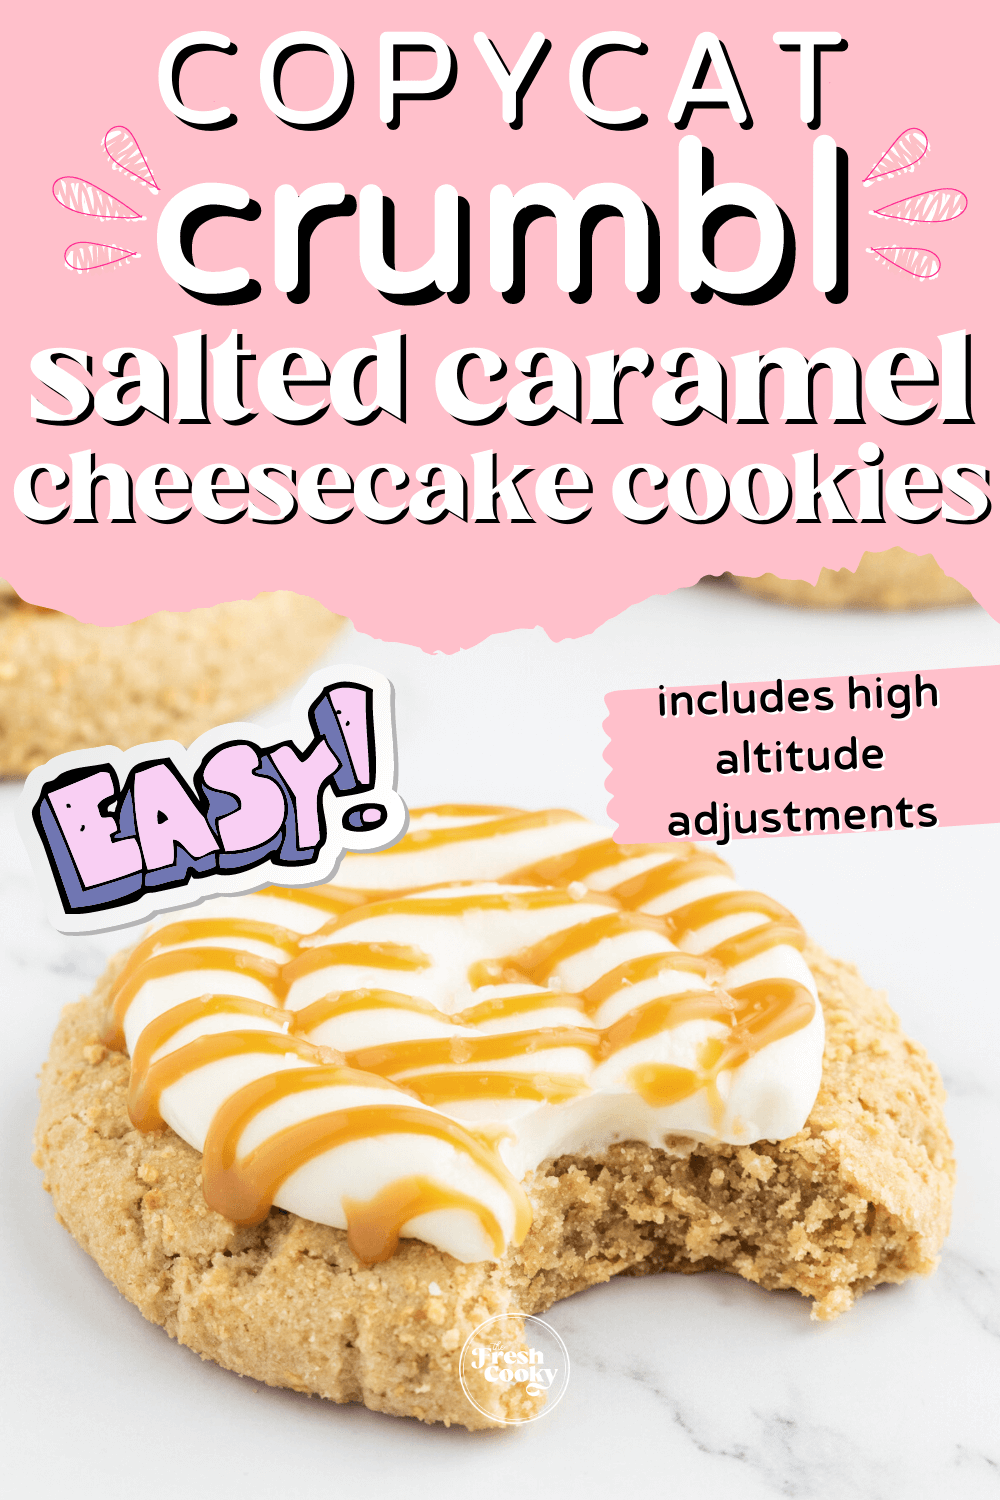 Salted caramel cheesecake cookie with bite taken out, for pinning.